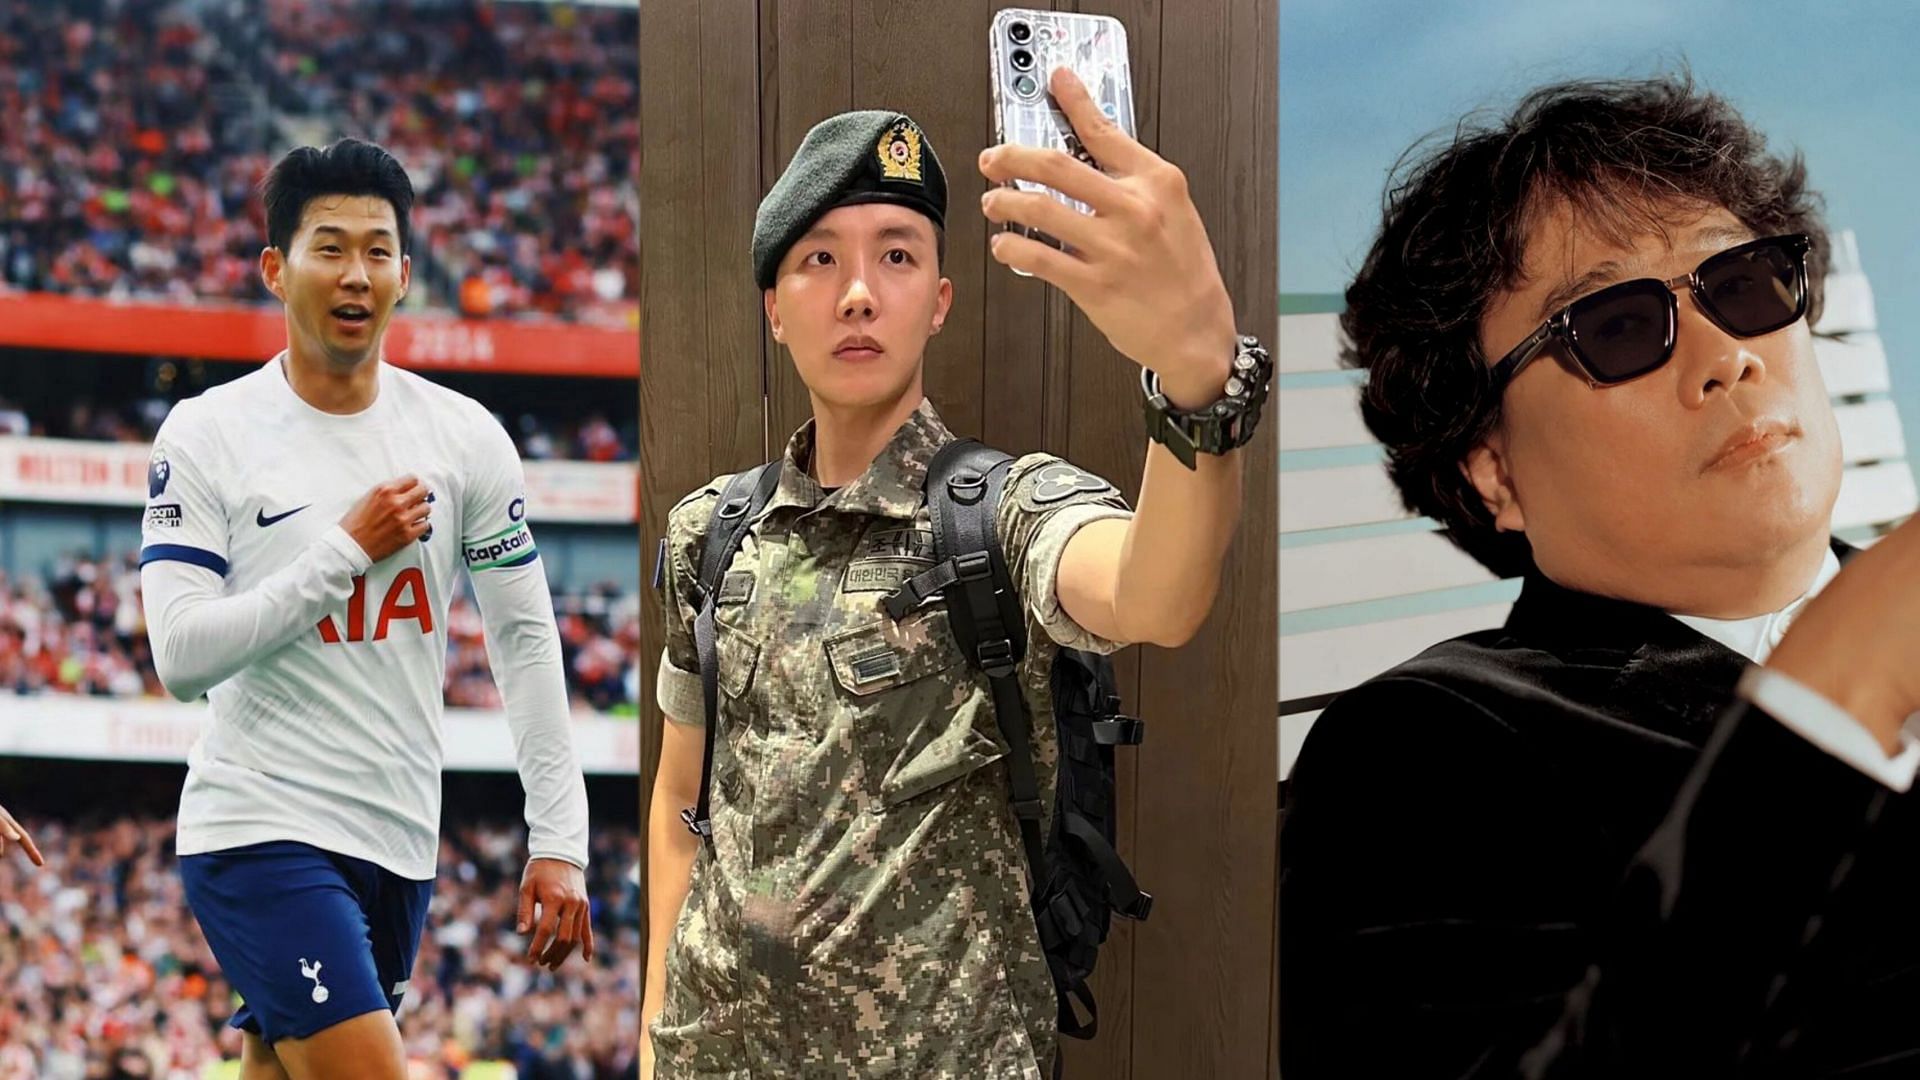 A discharged soldier posts BTS J-Hope